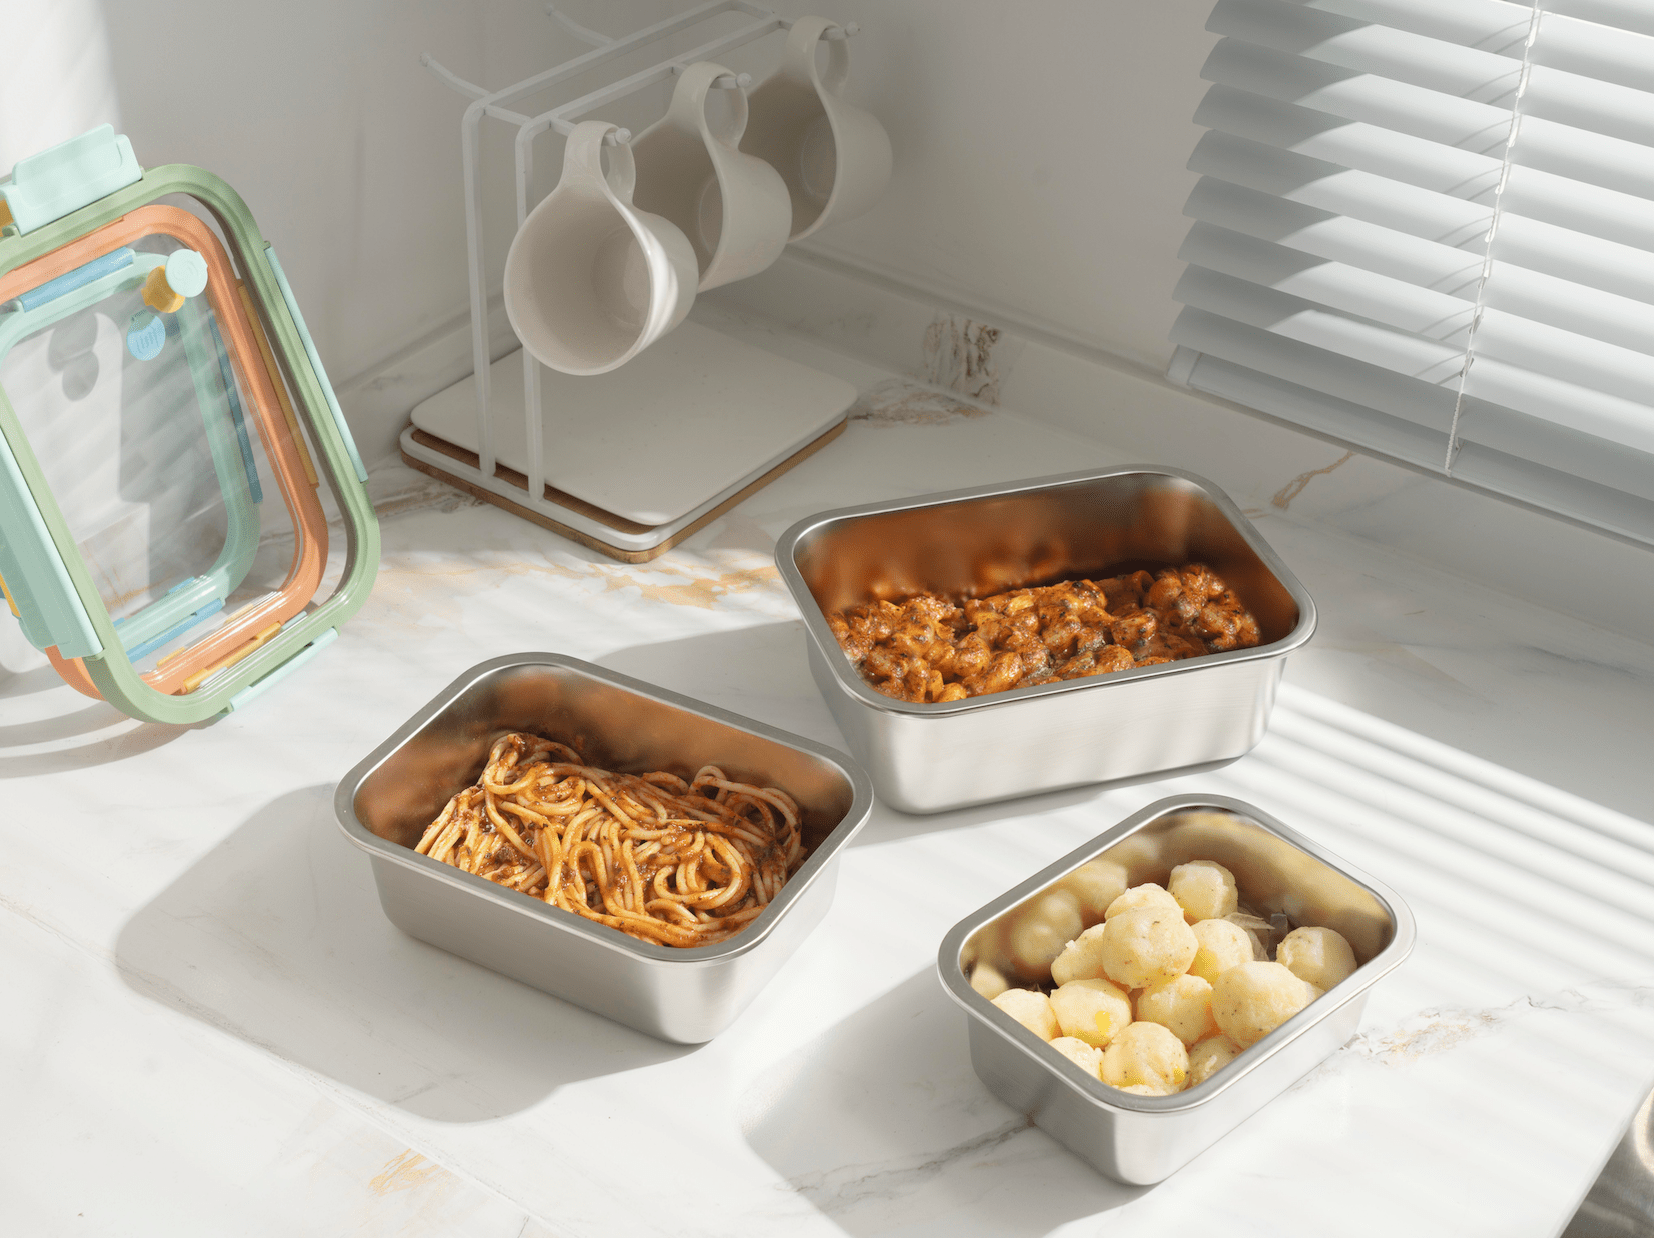 Genicook Mix & Match Stainless Steel Microwave Safe Container Set with Glass Lids - GenicookGenicook